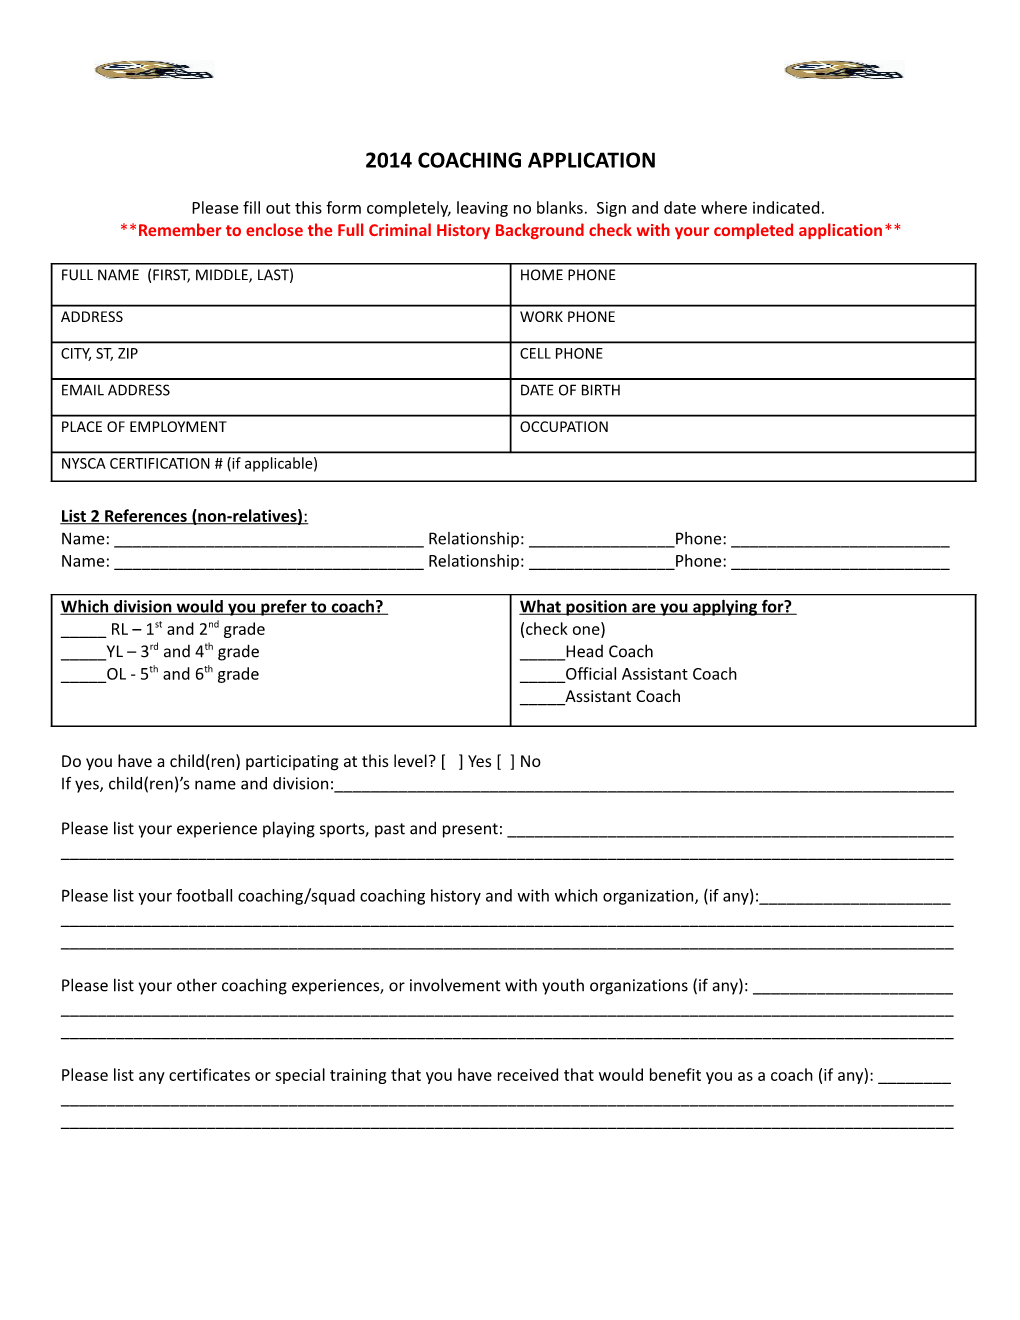 Please Fill out This Form Completely, Leaving No Blanks. Sign and Date Where Indicated